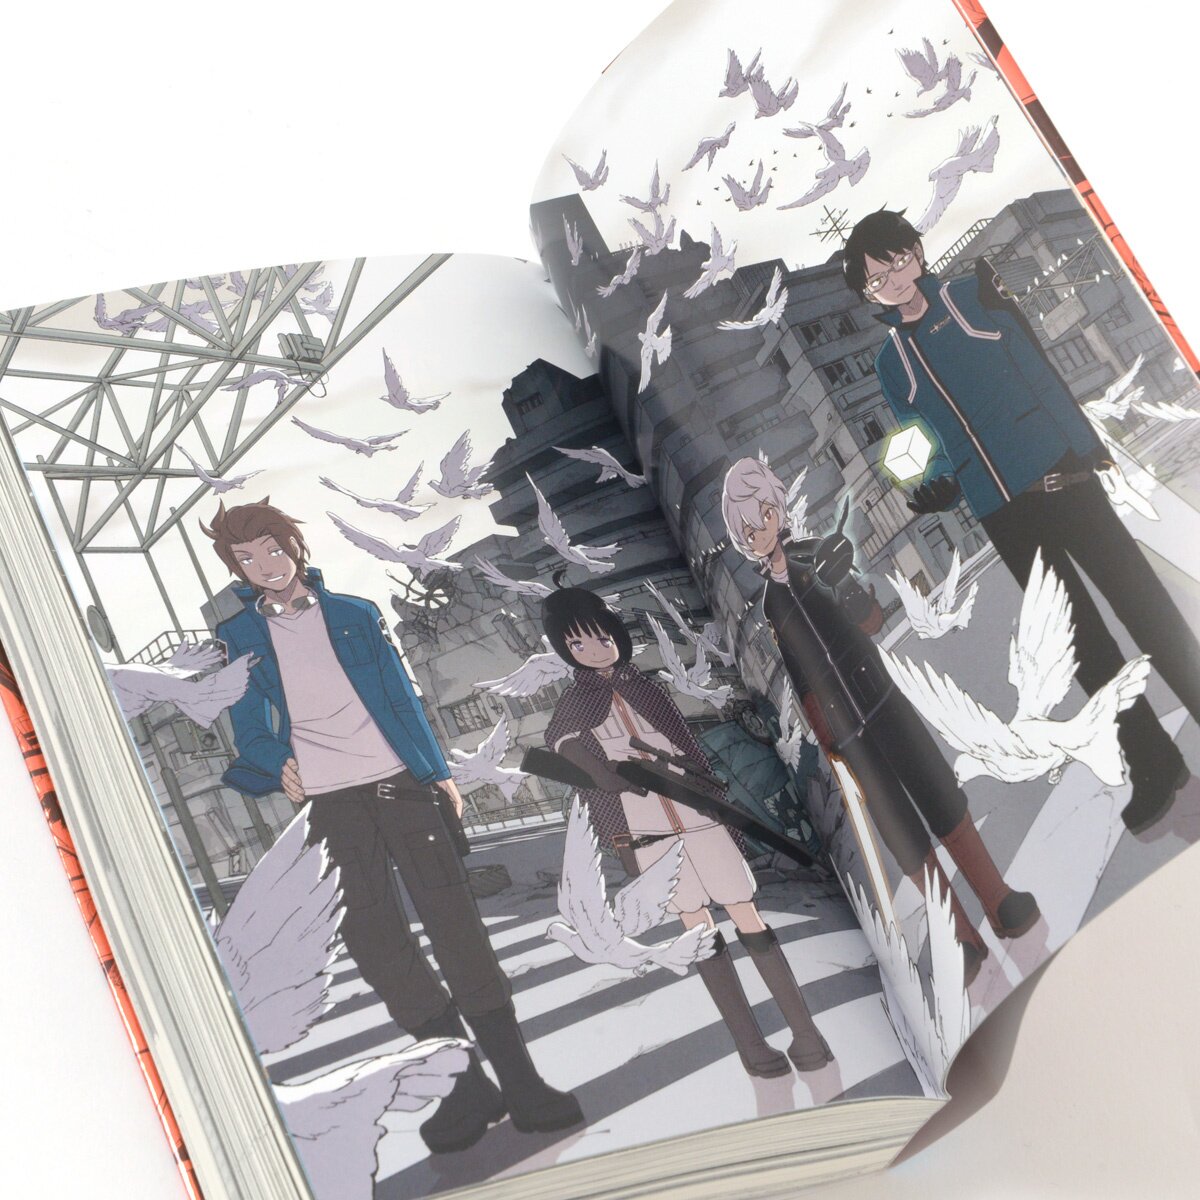 World Trigger, Vol. 3, Book by Daisuke Ashihara, Official Publisher Page